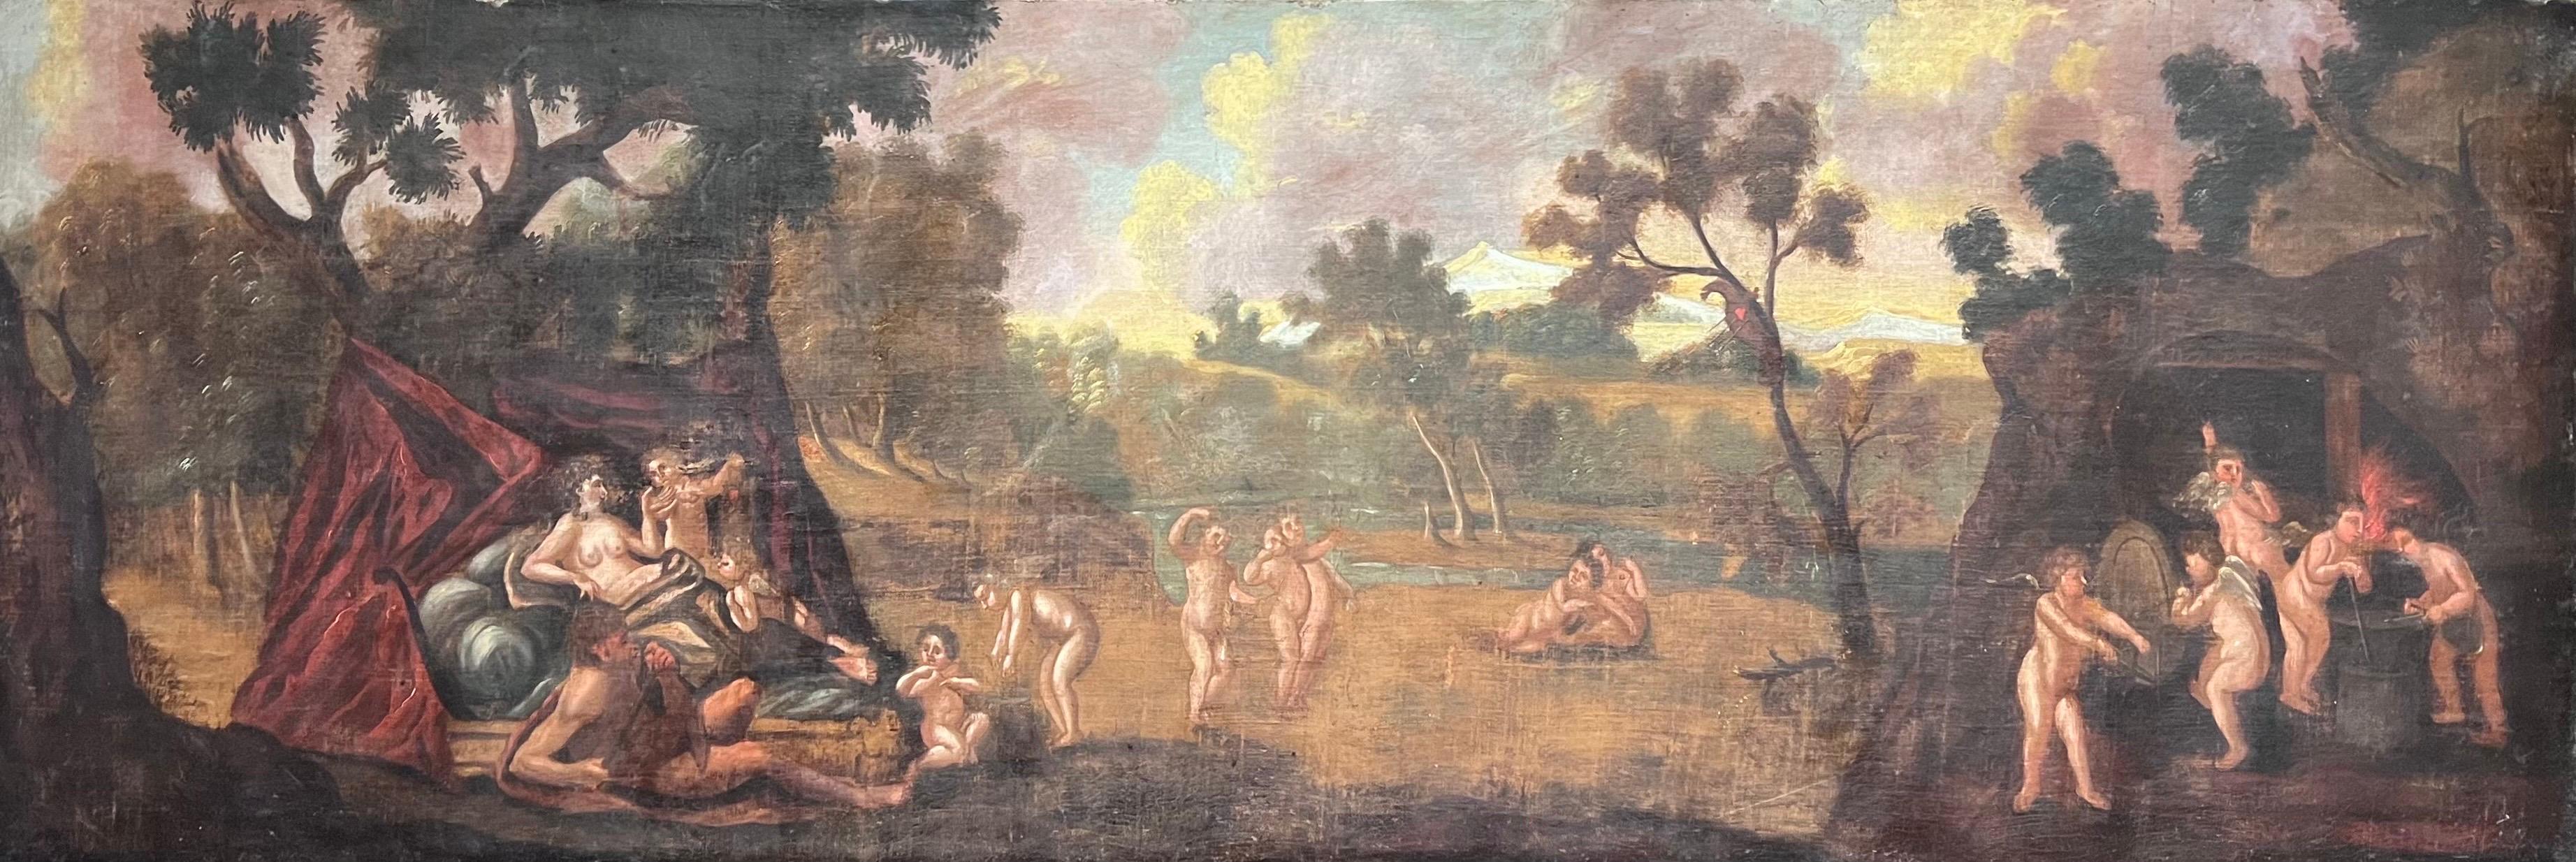 Huge Old Master Oil Painting 17th century Diana & Cupids in Panoramic Landscape